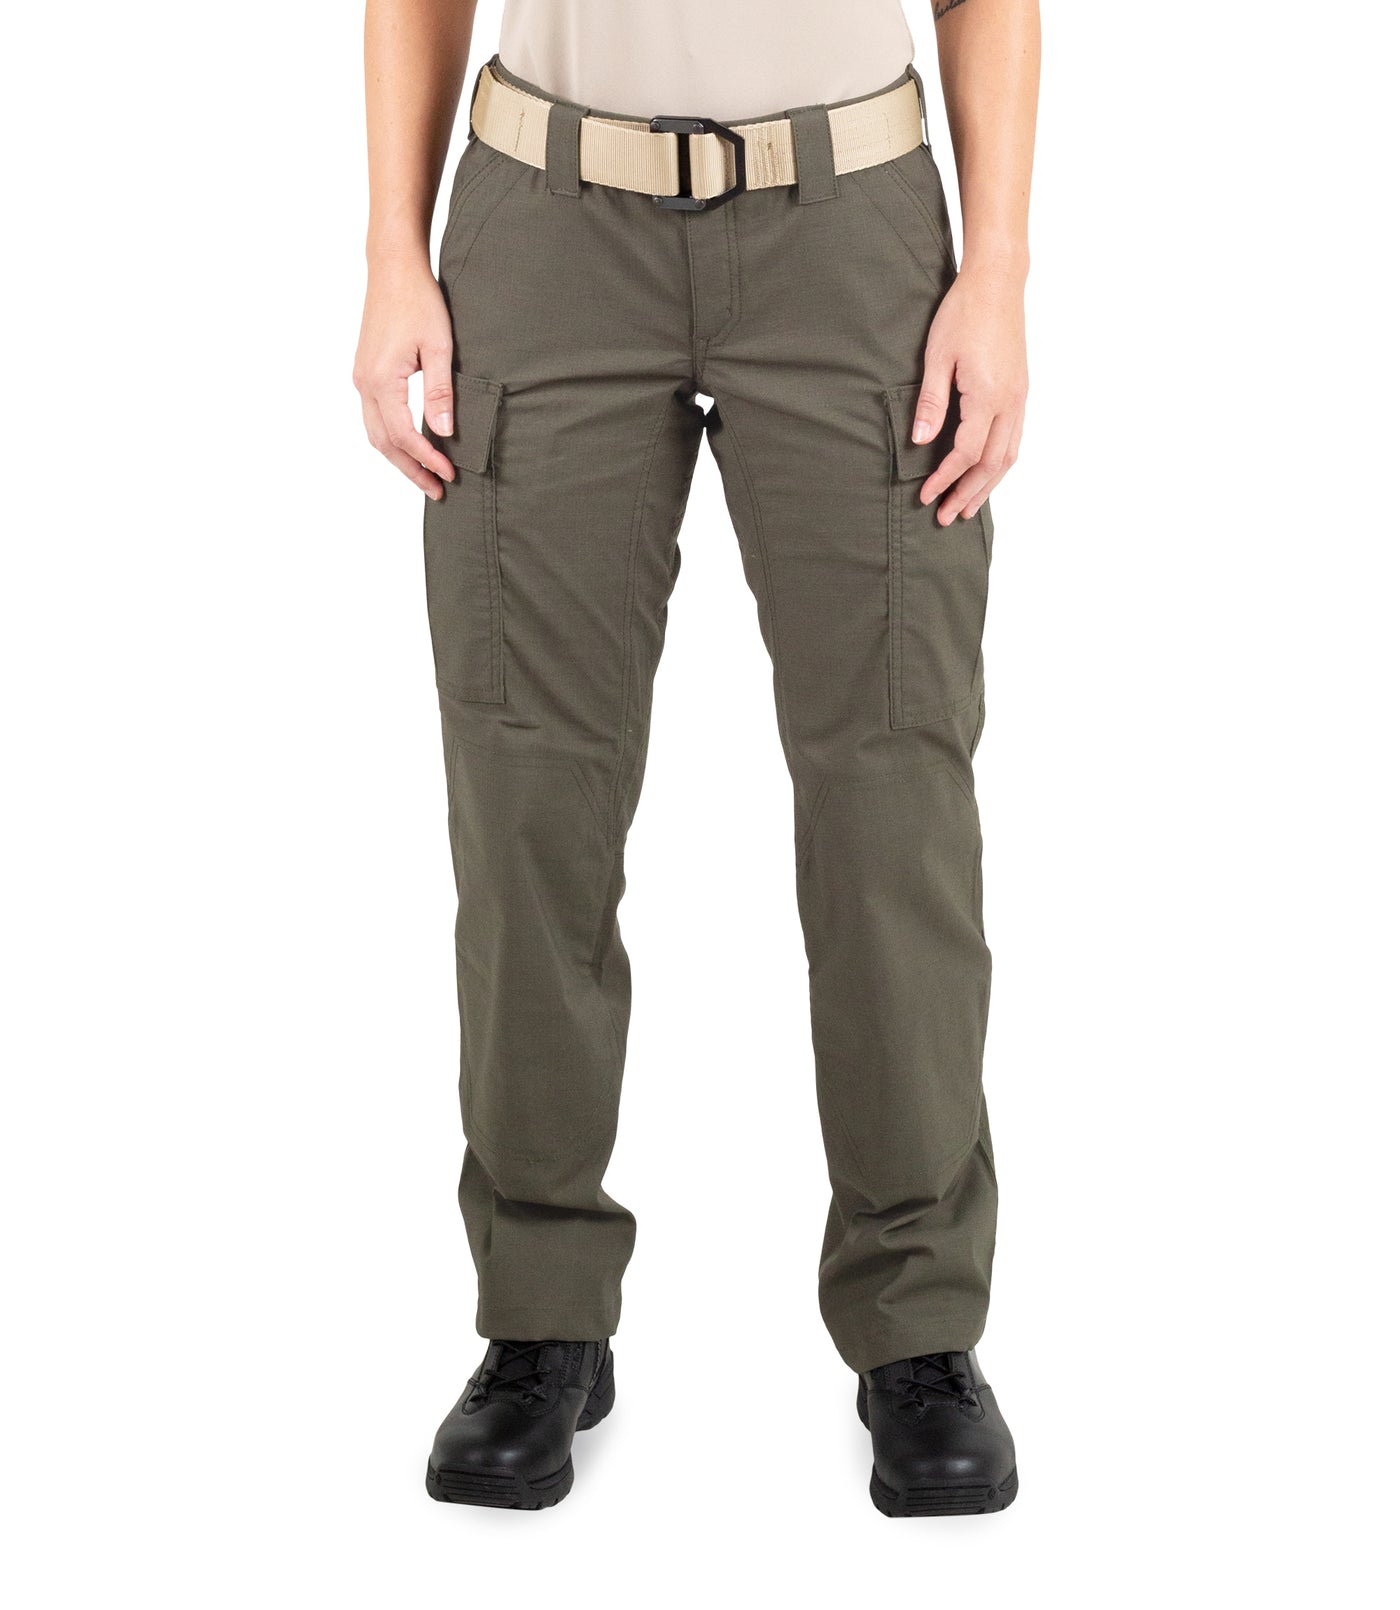 Front of Women's V2 BDU Pant in OD Green